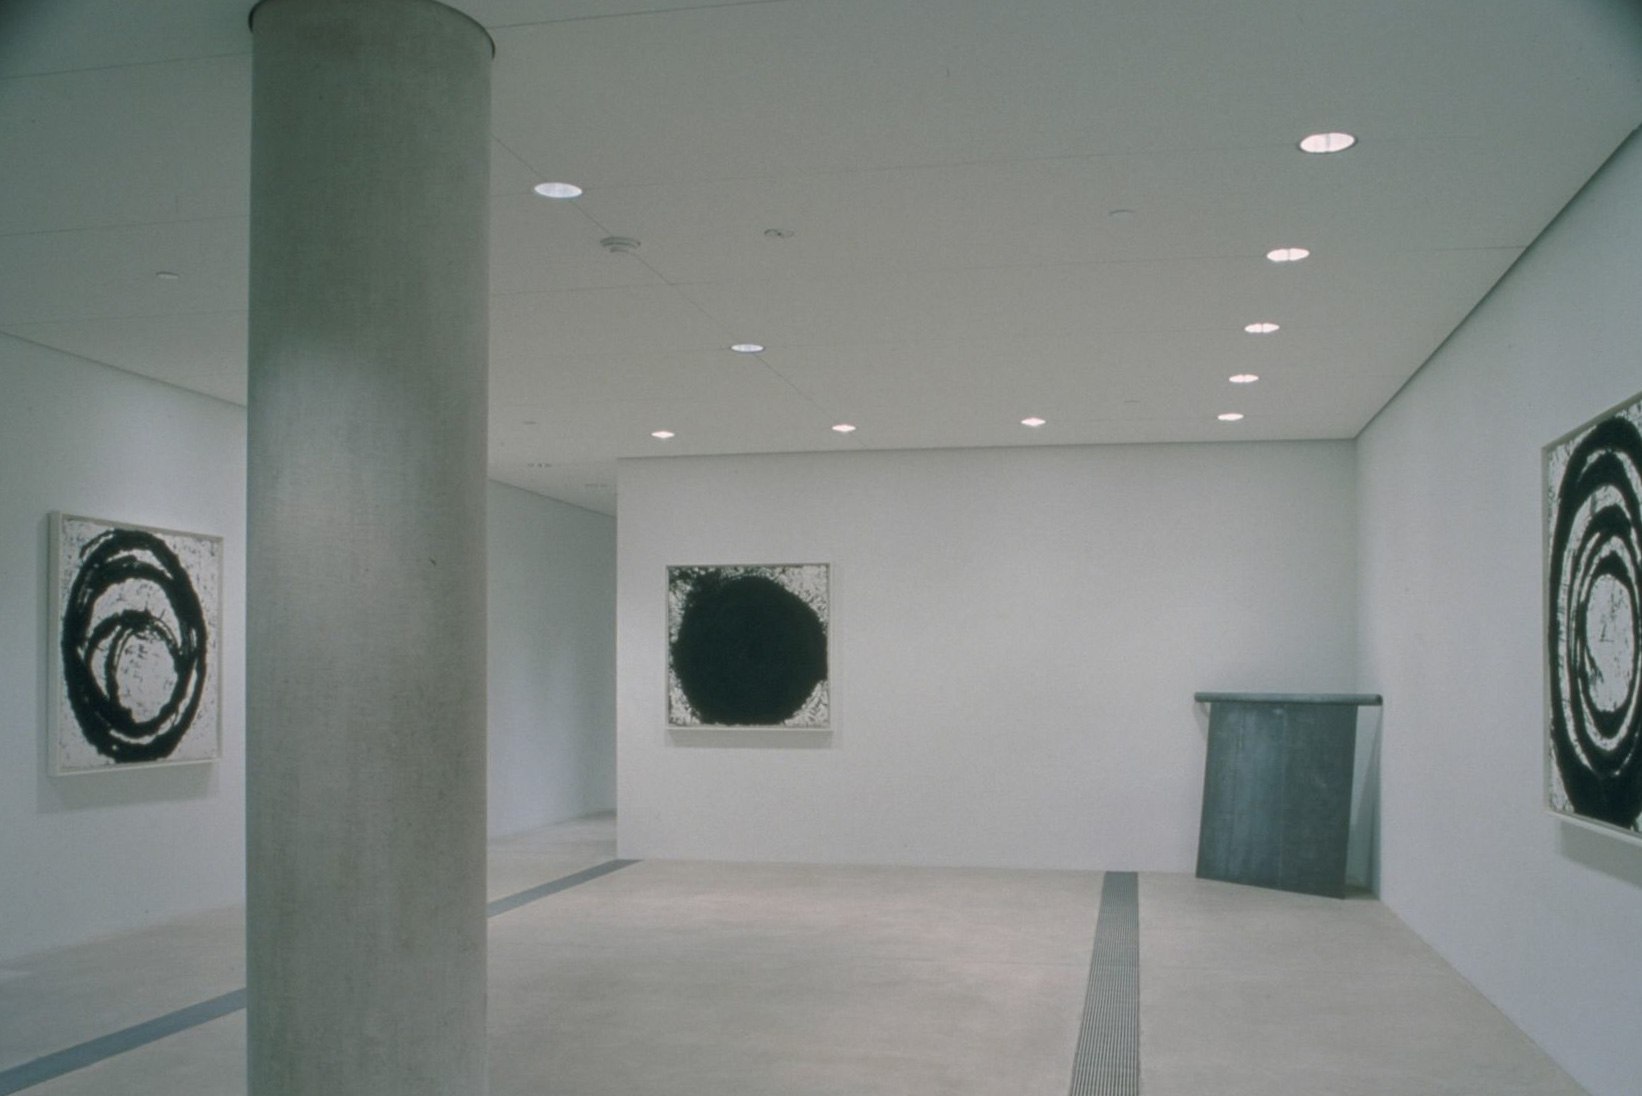 A view of the Entrance Gallery, with three black and white square canvases with circular designs and a steel square that leans against a corner.